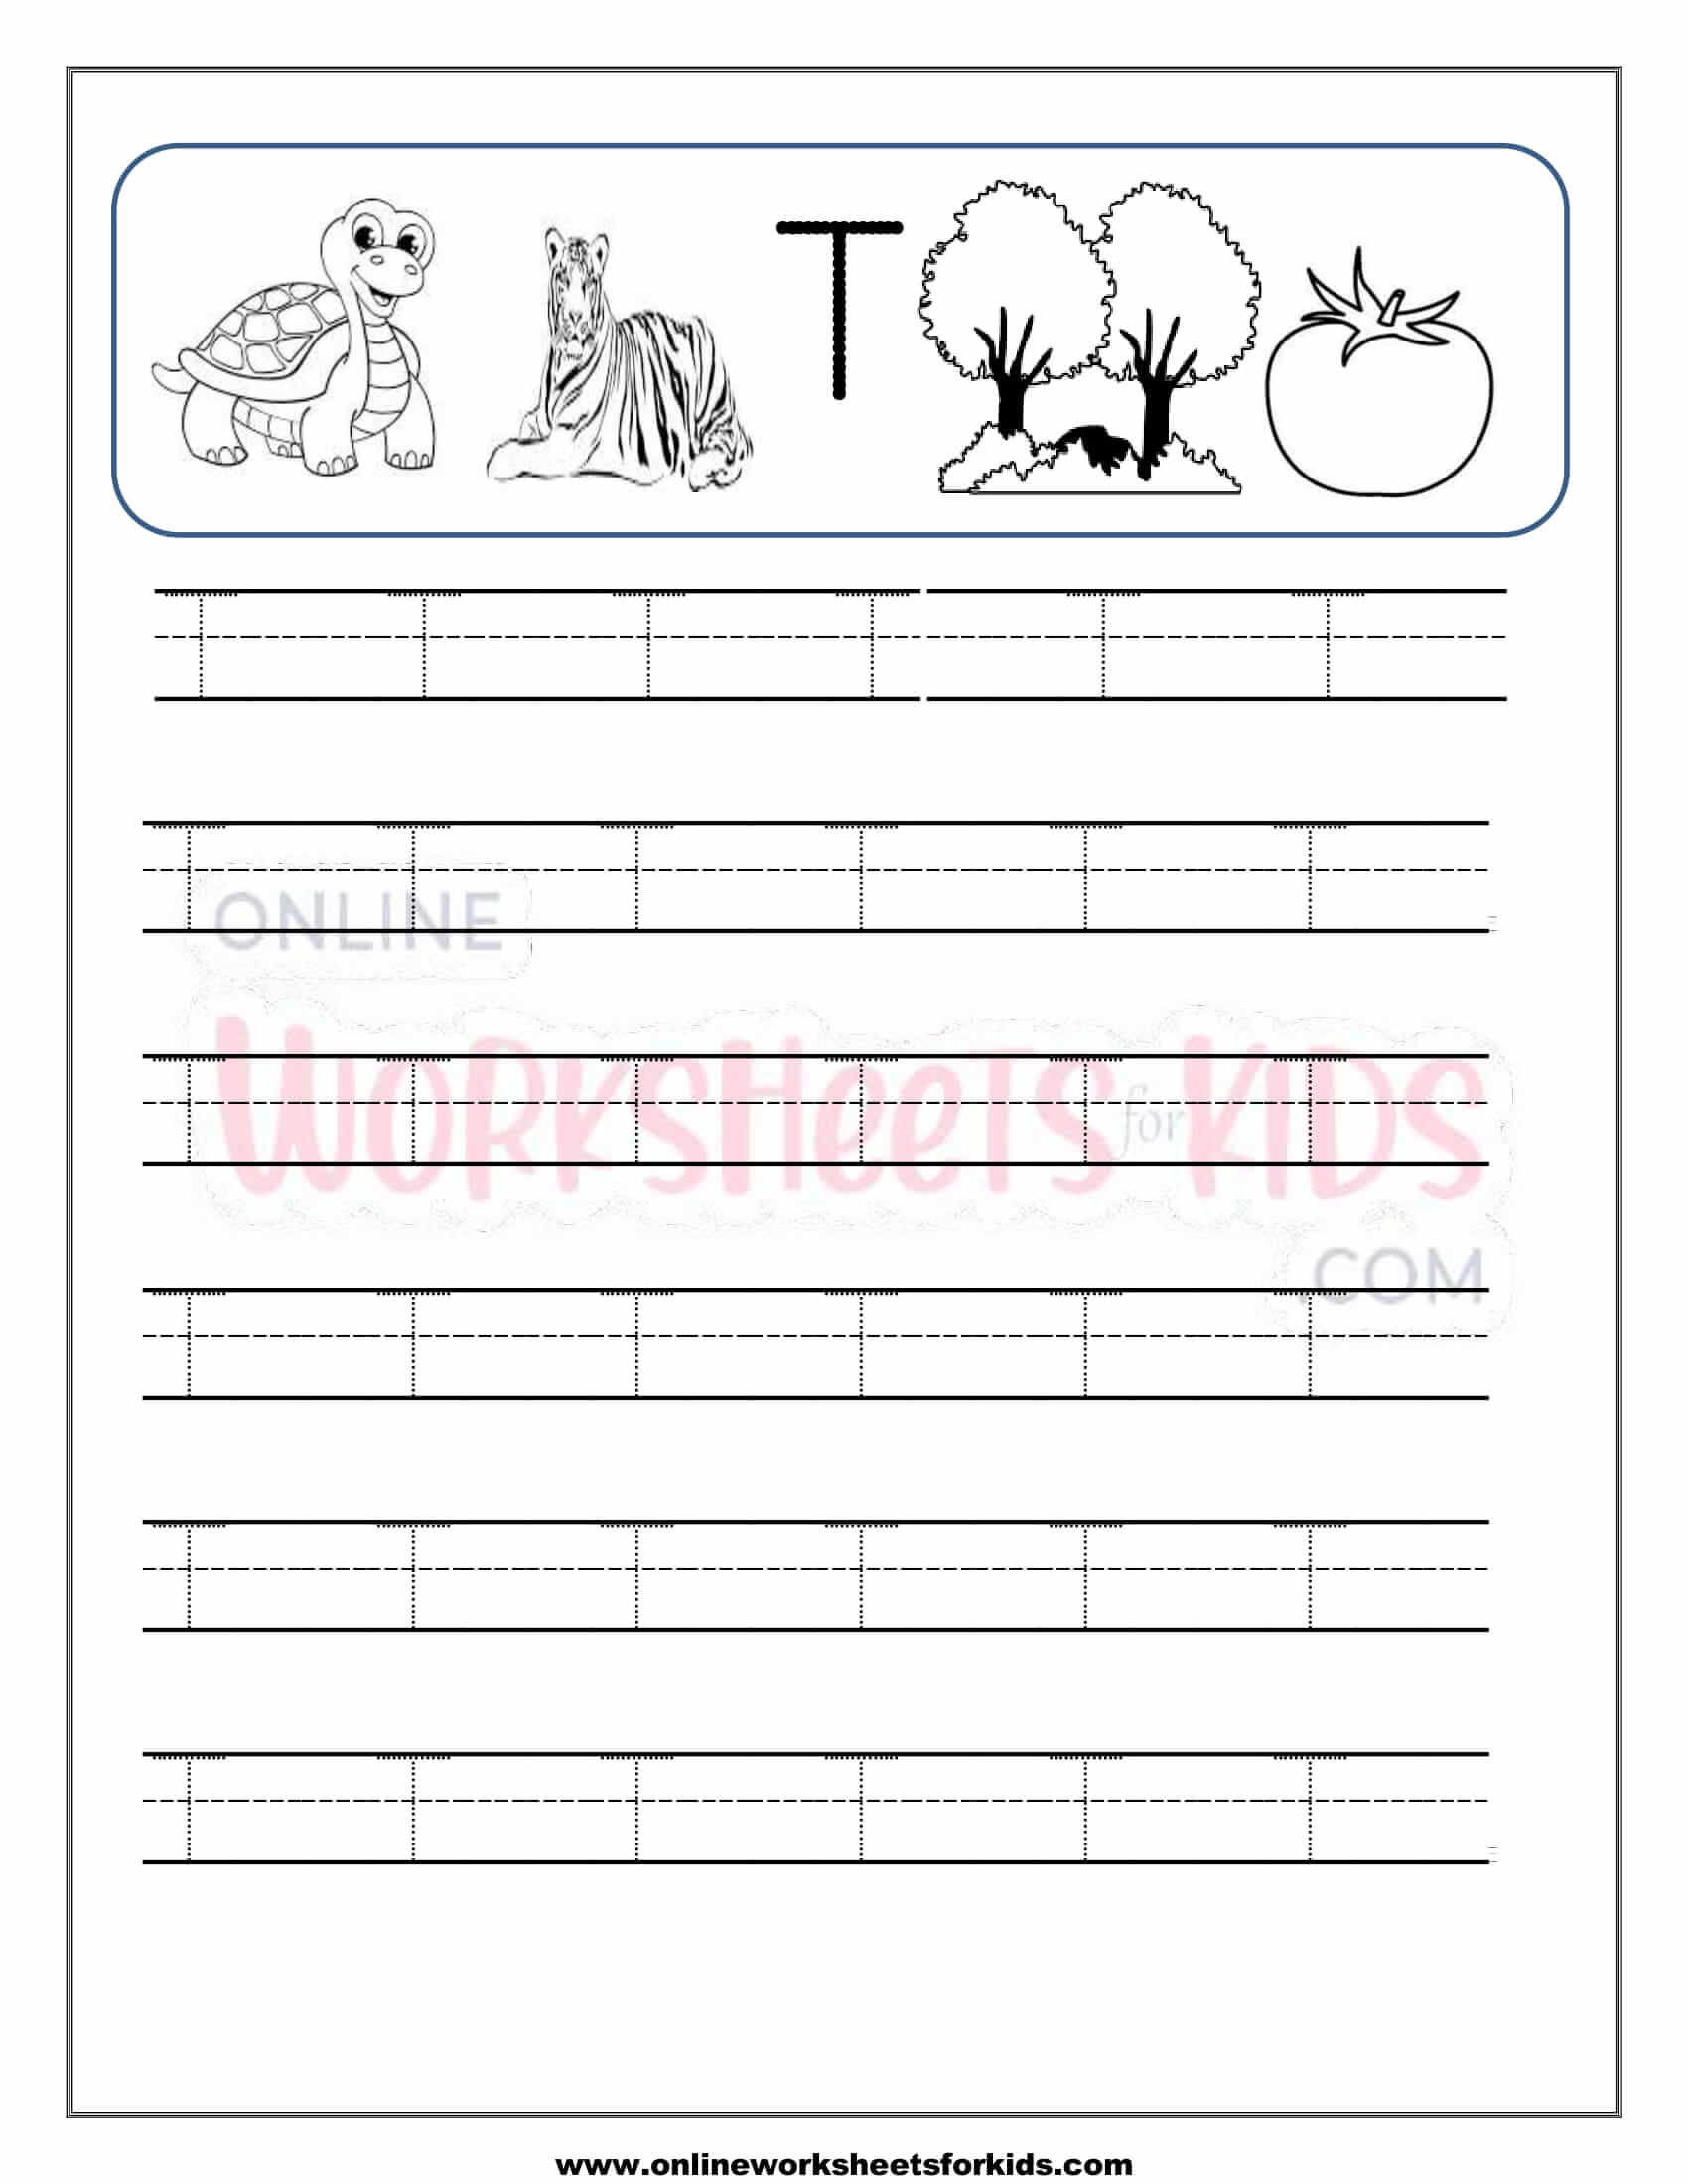 letter-tracing-worksheet-capital-letters-20